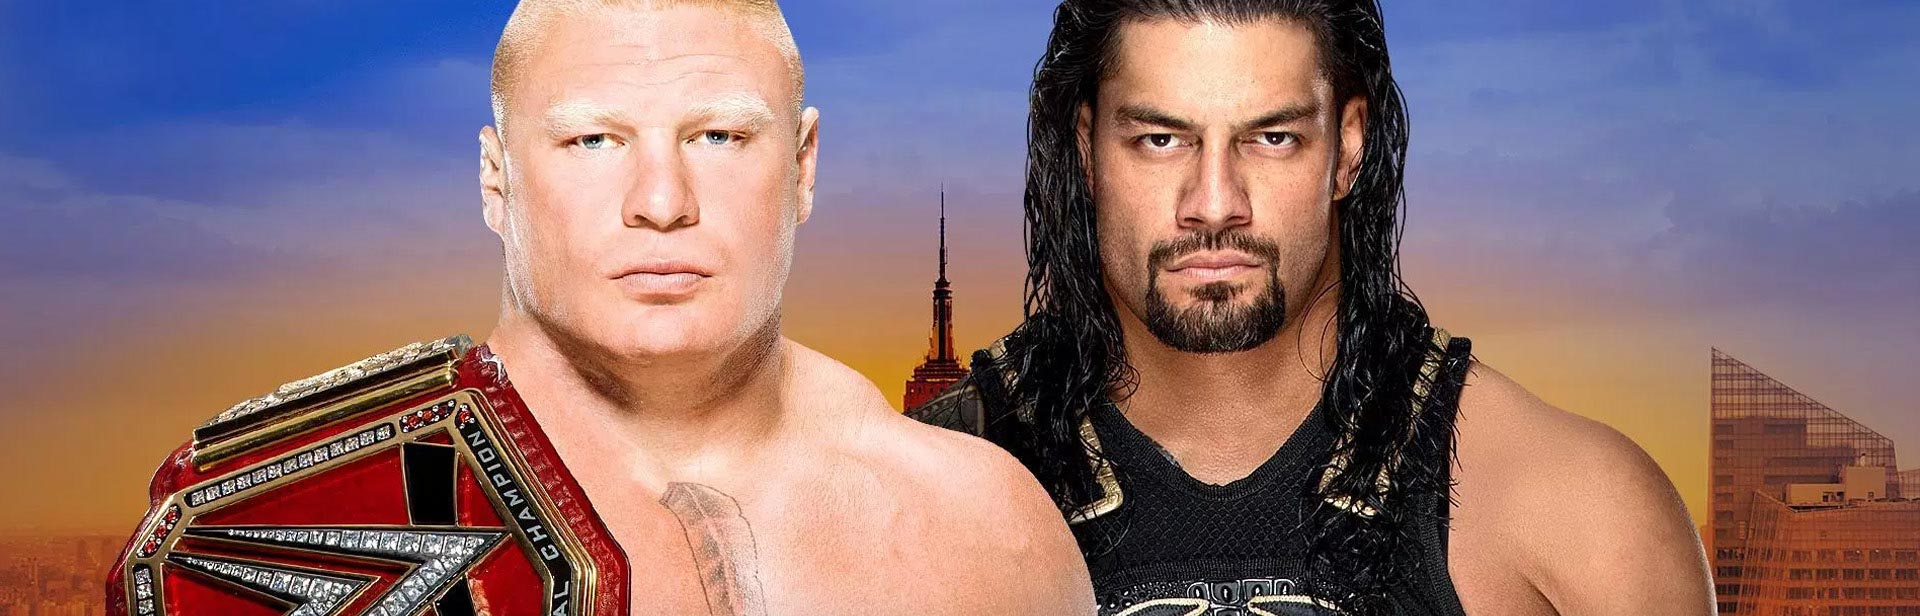 WWE SummerSlam matches, card & how to watch